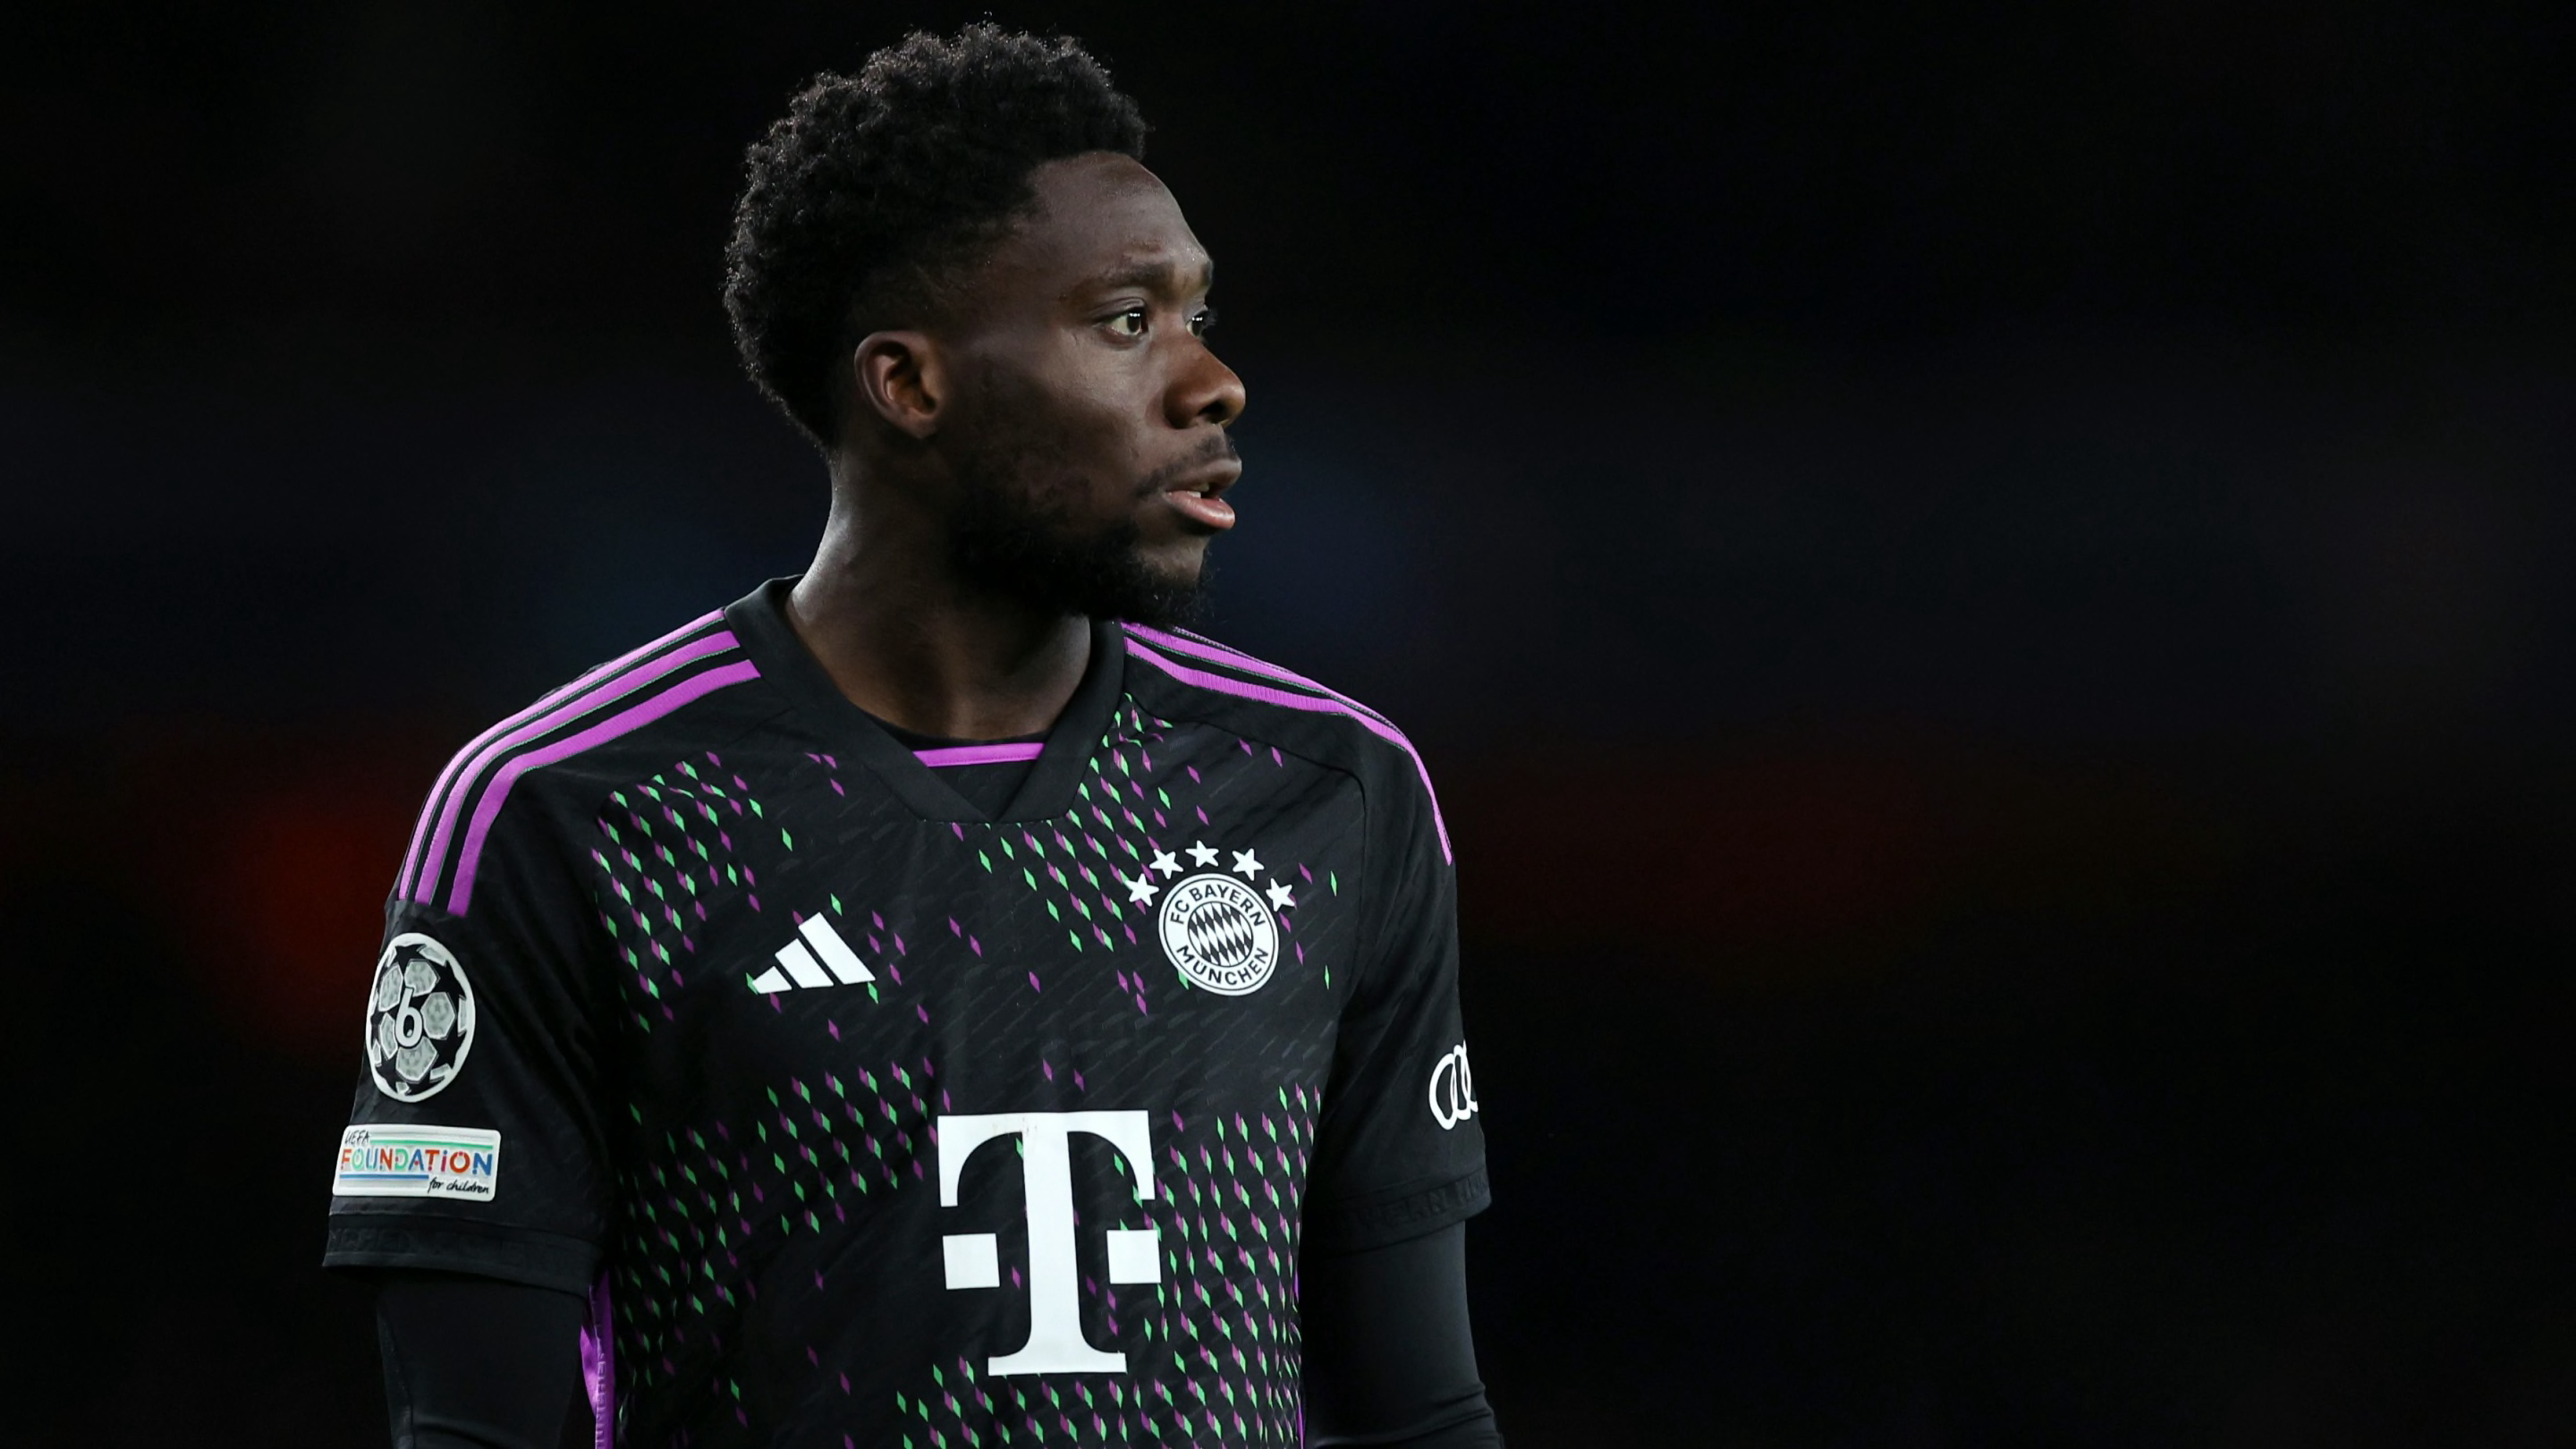 Bayern Munich step up efforts to stop Alphonso Davies joining Real Madrid - report